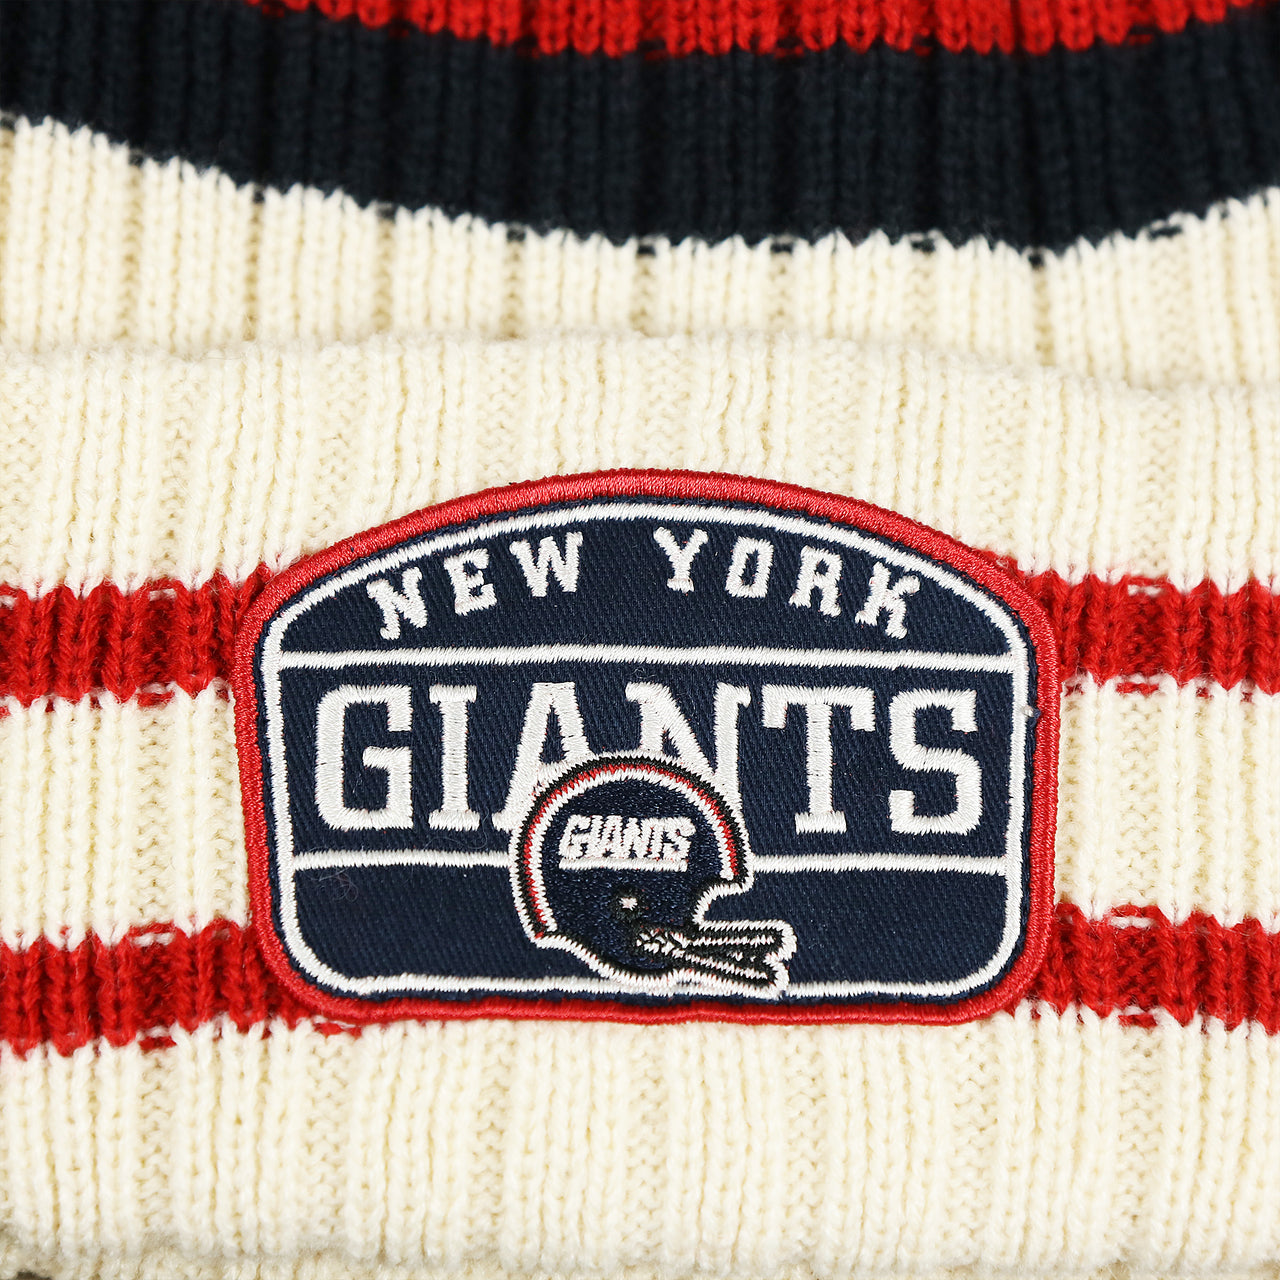 The Giants Patch on the Throwback New York Giants Legacy Giants Helmet Patch Pom Pom Beanie | Natural Beanie